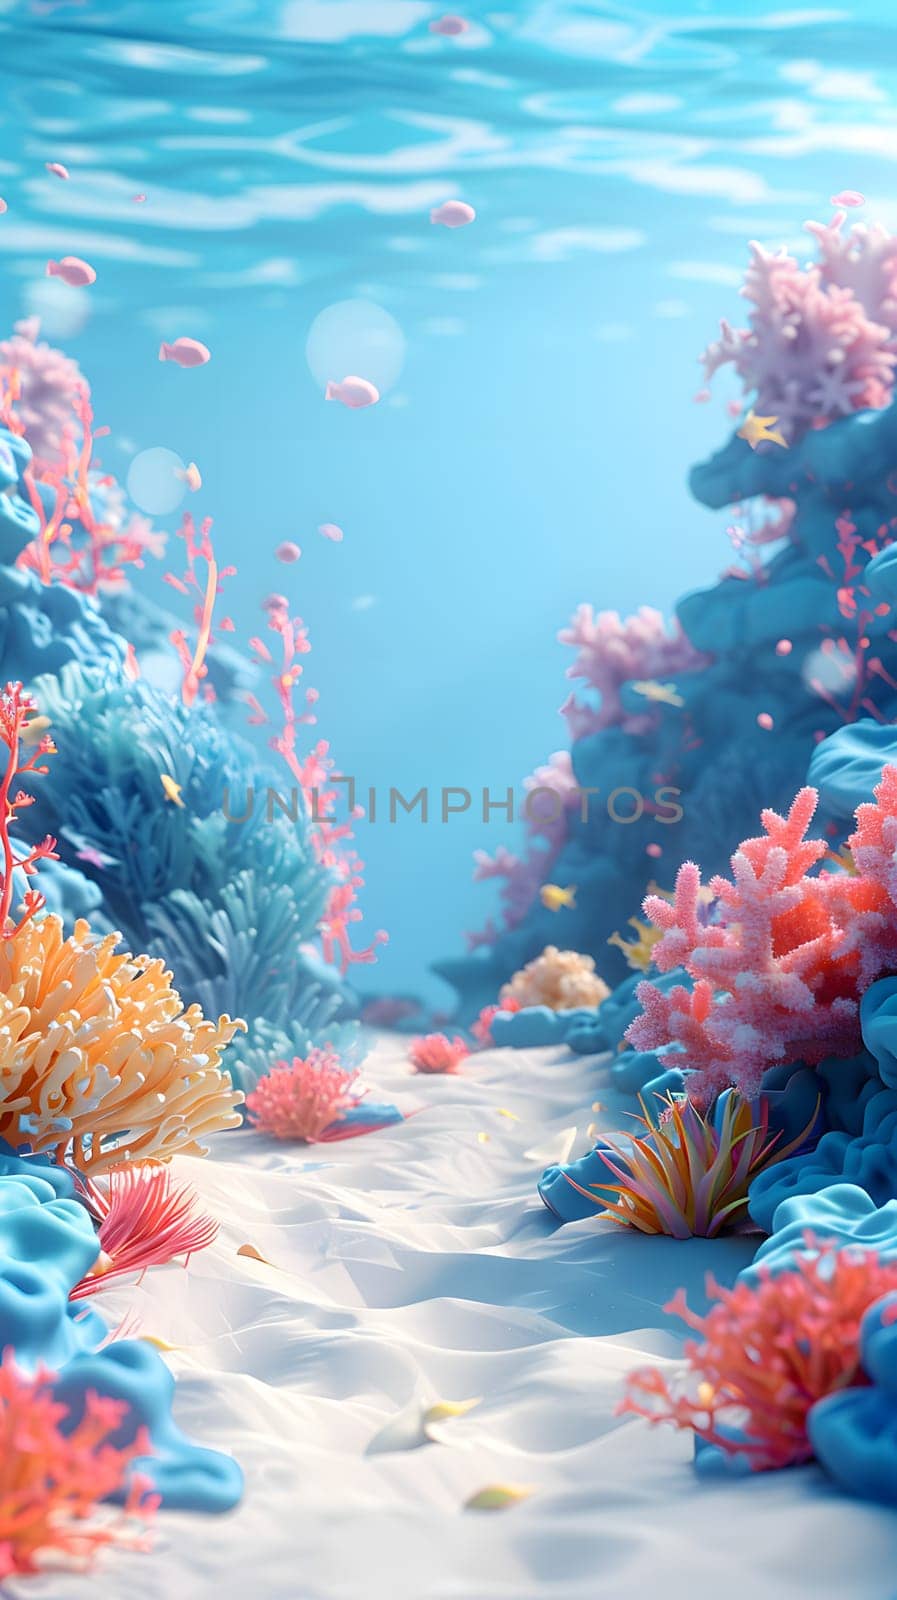 Underwater, the fluid blue water is home to various organisms such as coral, creating vibrant coastal and oceanic landforms in shades of pink, aqua, and more